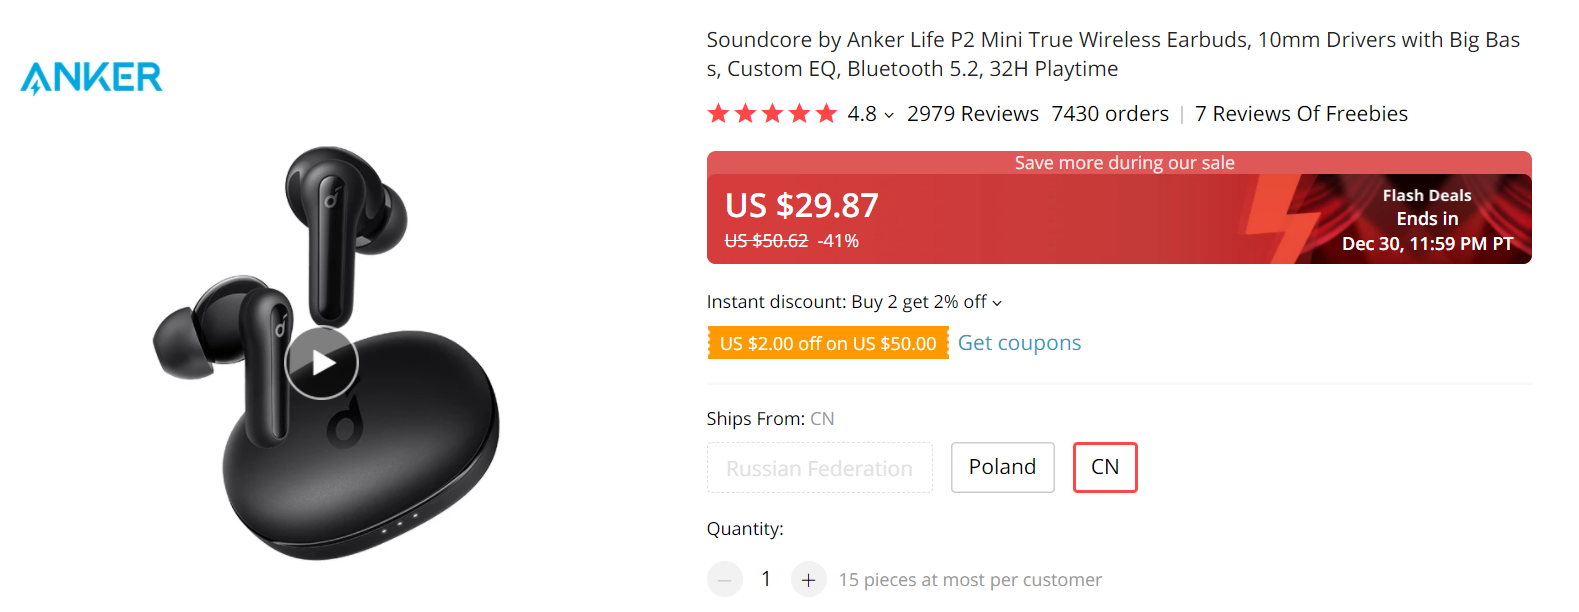 Soundcore By Anker Life P2 Mini Earbuds